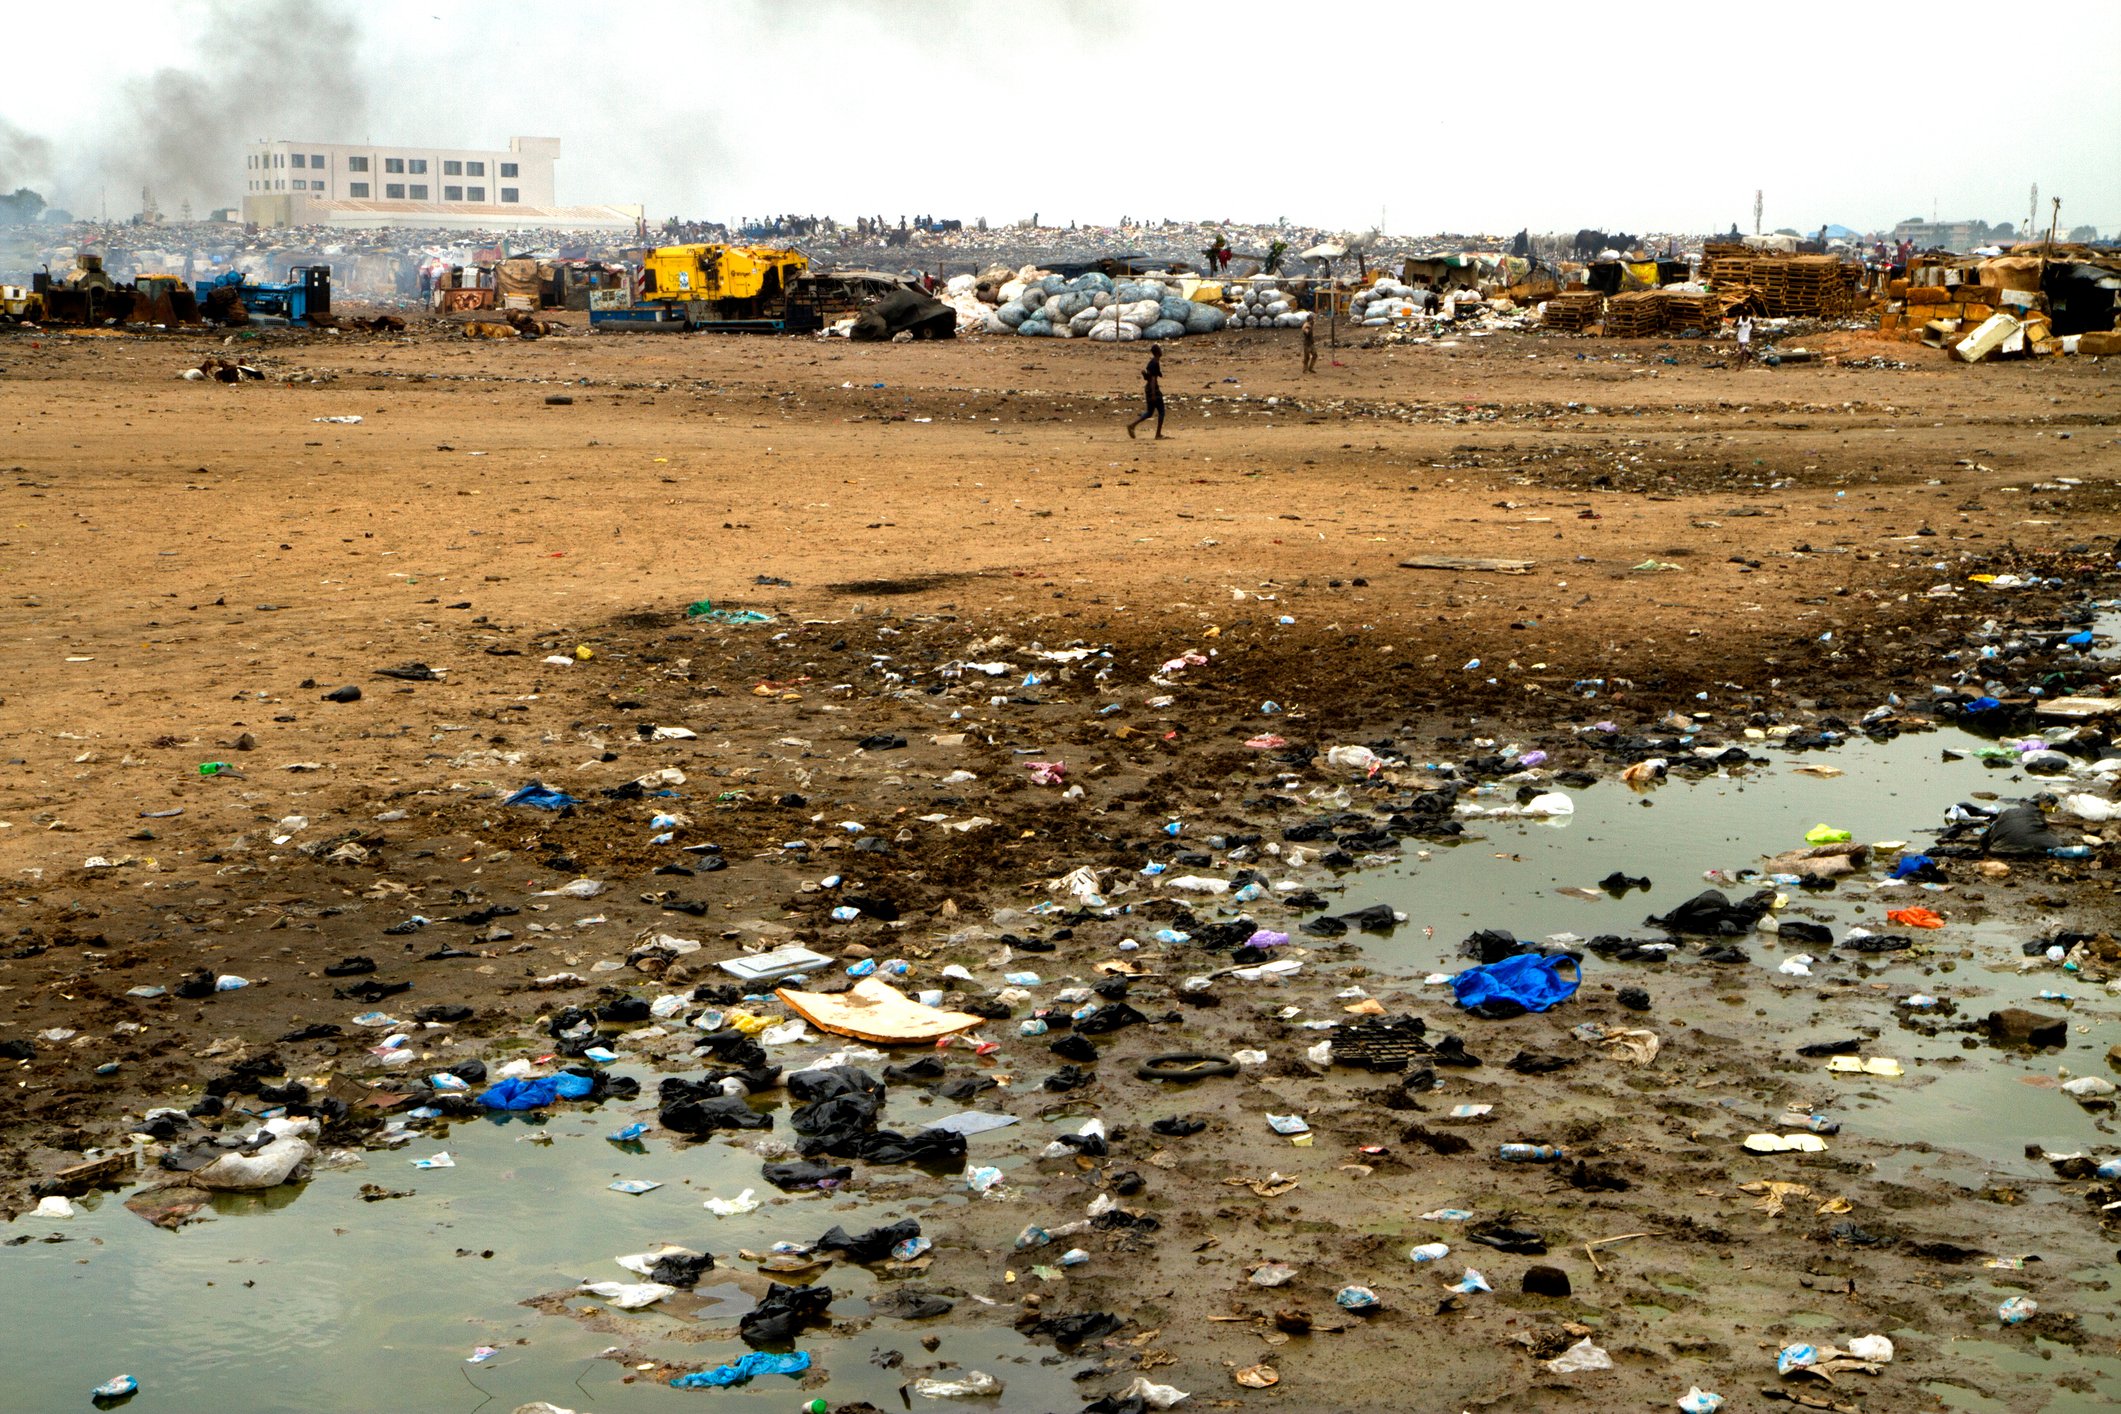 Rubbish on the ground at Agbogbloshie in Ghana.